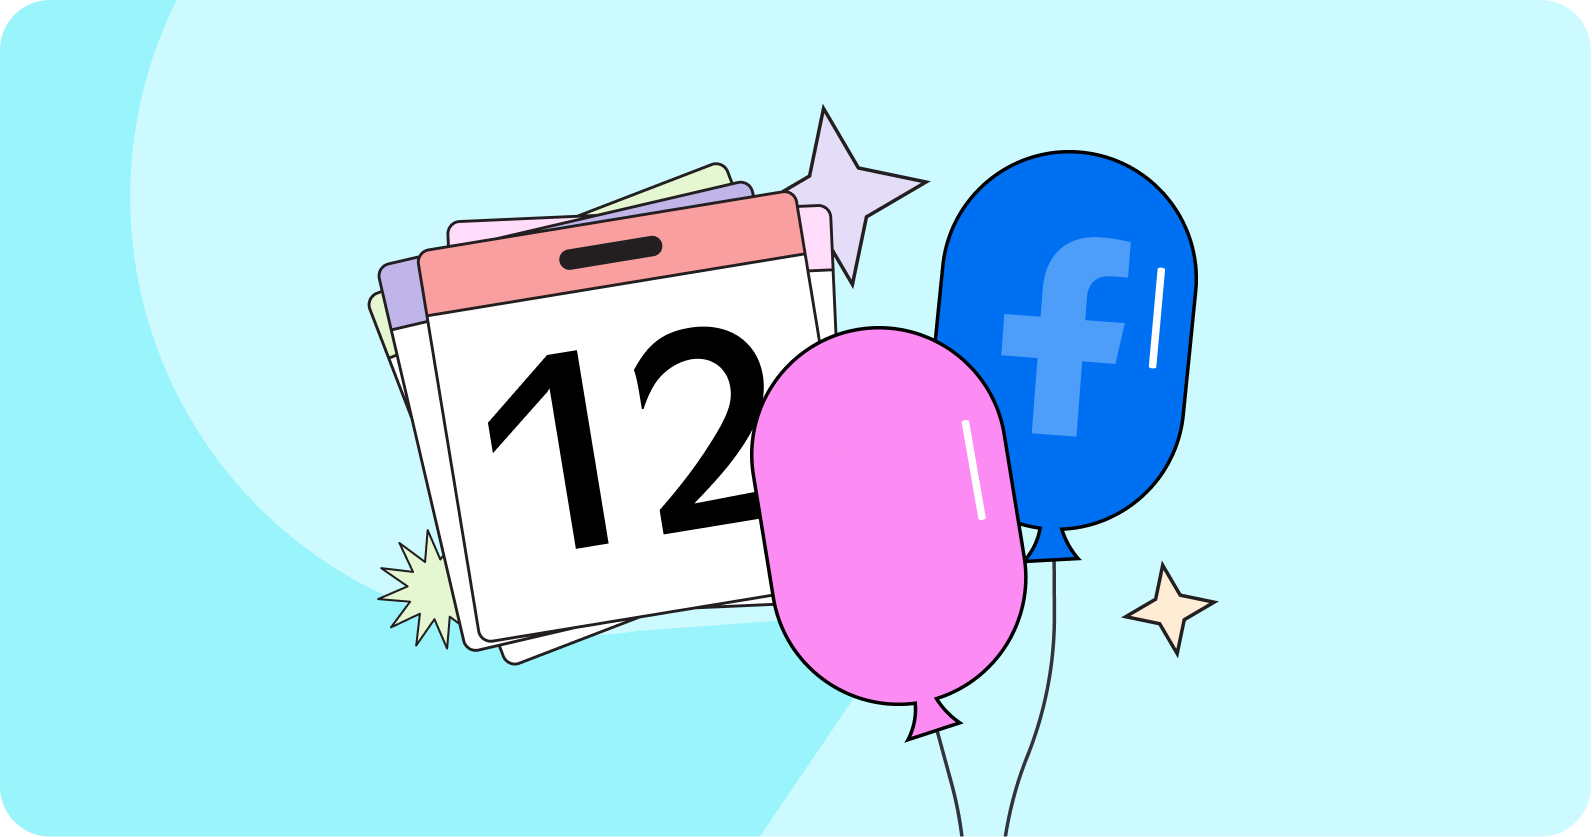 Feed the Birthday Friends GIF and PNG Clip Art Set